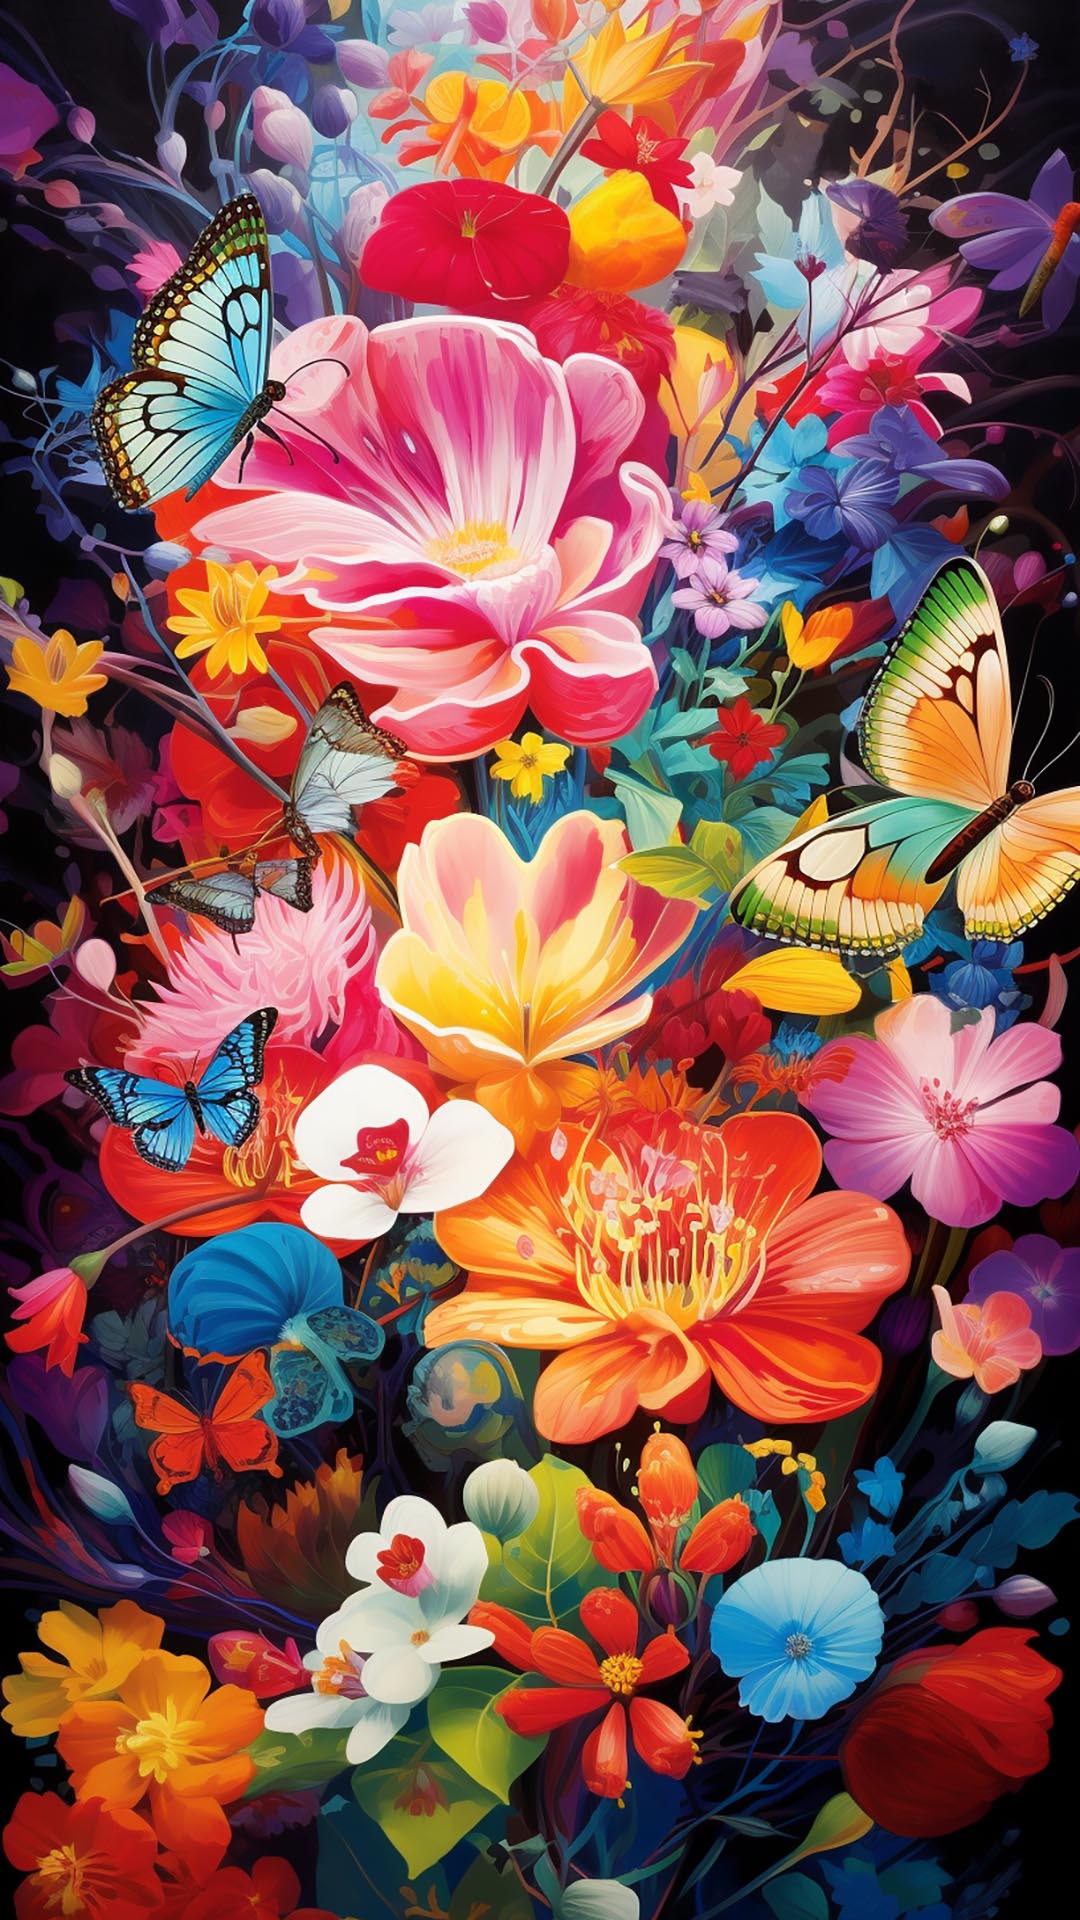 Colorful detailed floral art wallpaper